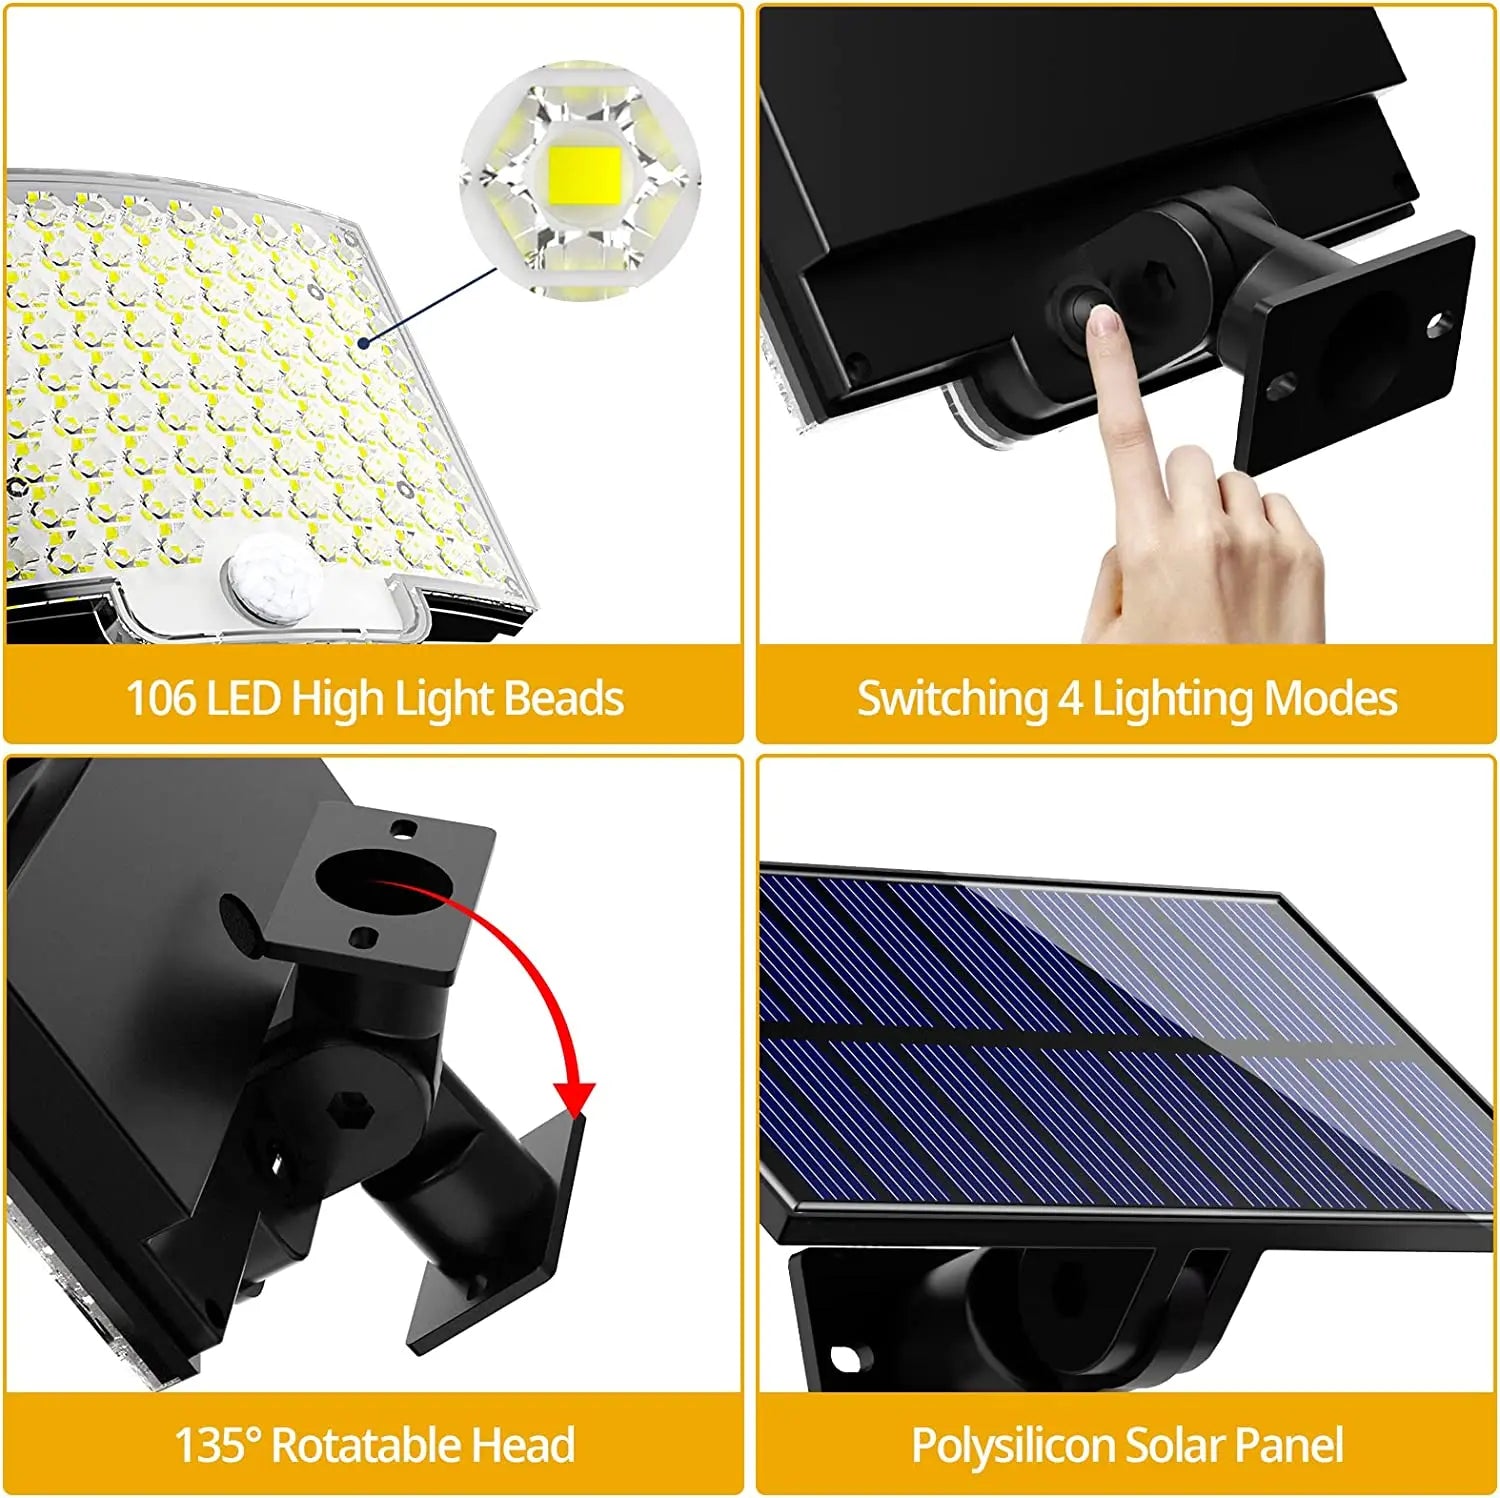 LED Solar Light, Adjustable LED light with 106 LEDs, 4 modes, and solar-powered head for bright and customizable illumination.